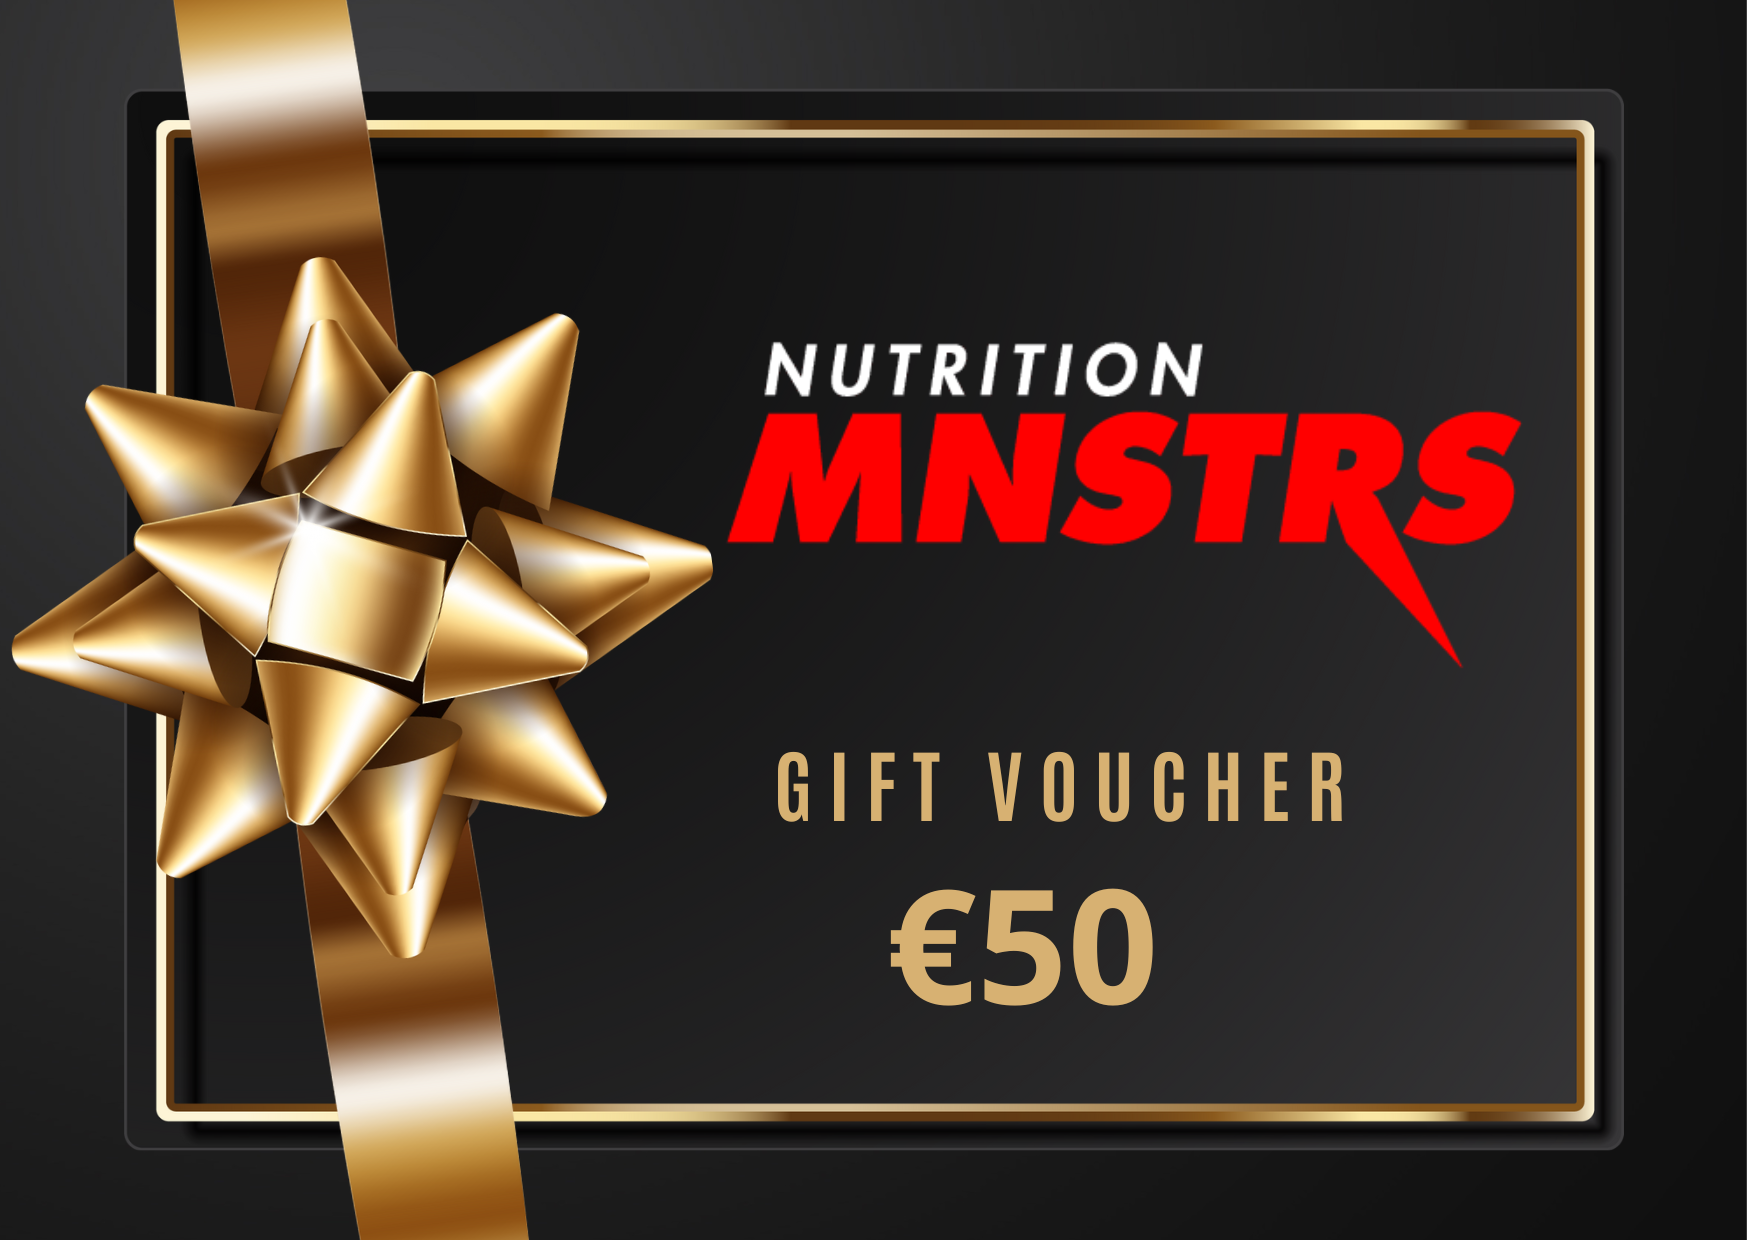 Gift voucher Nutrition Monsters